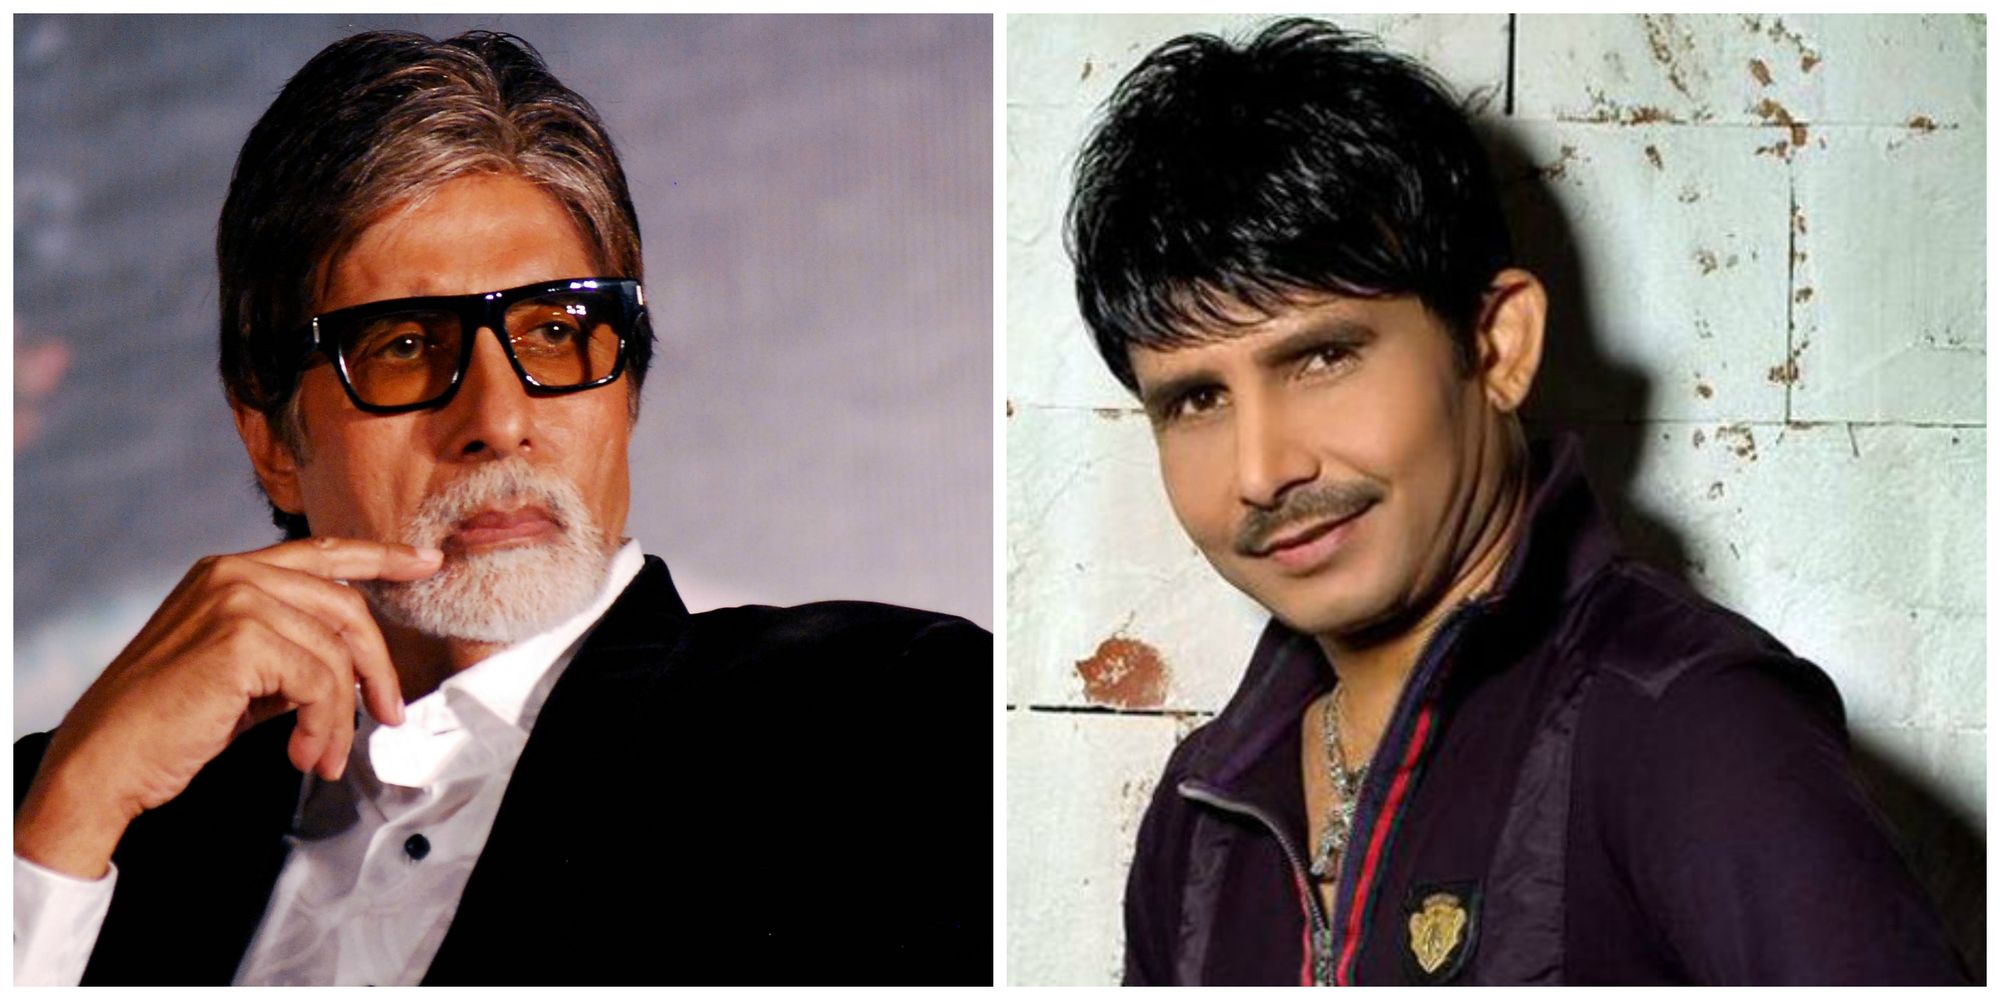 Amitabh Bachchan And KRK Just Had A Strange Twitter Chat